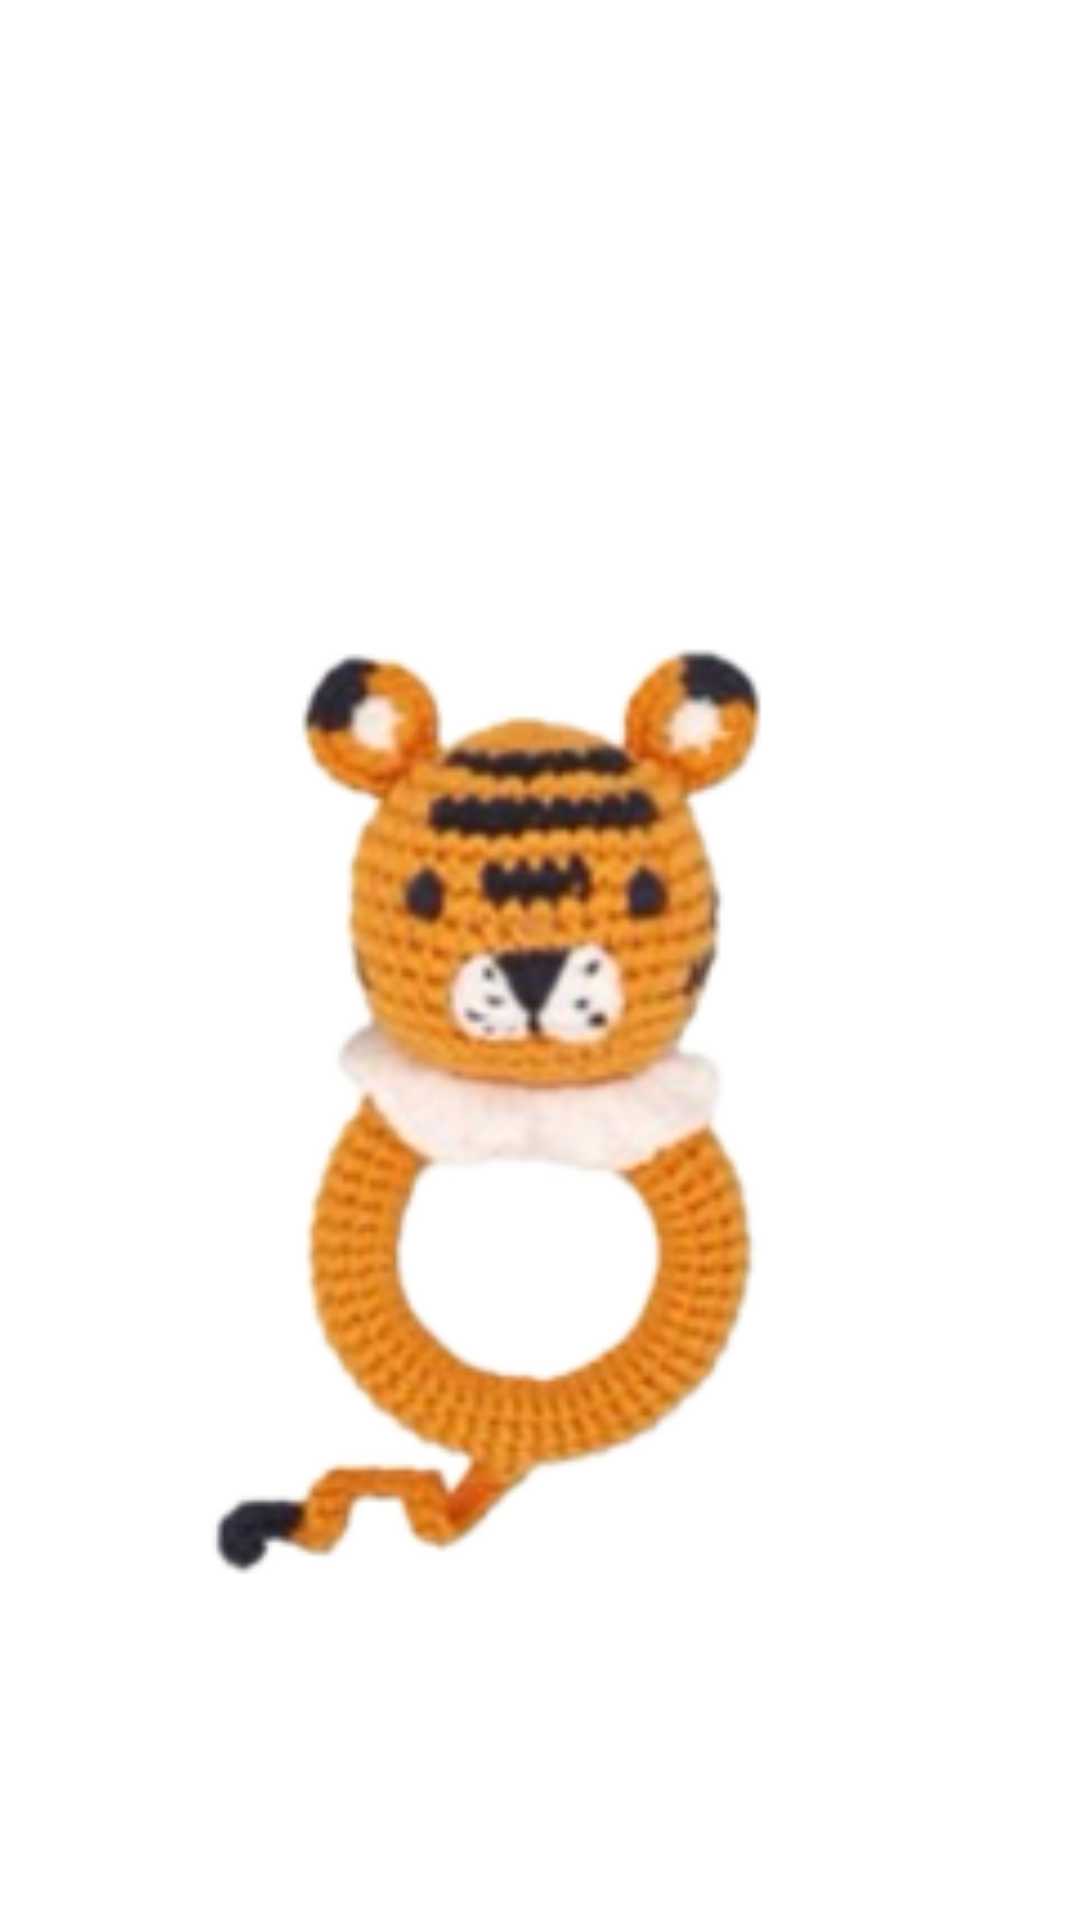 Baby Rattle - Tiger 8015